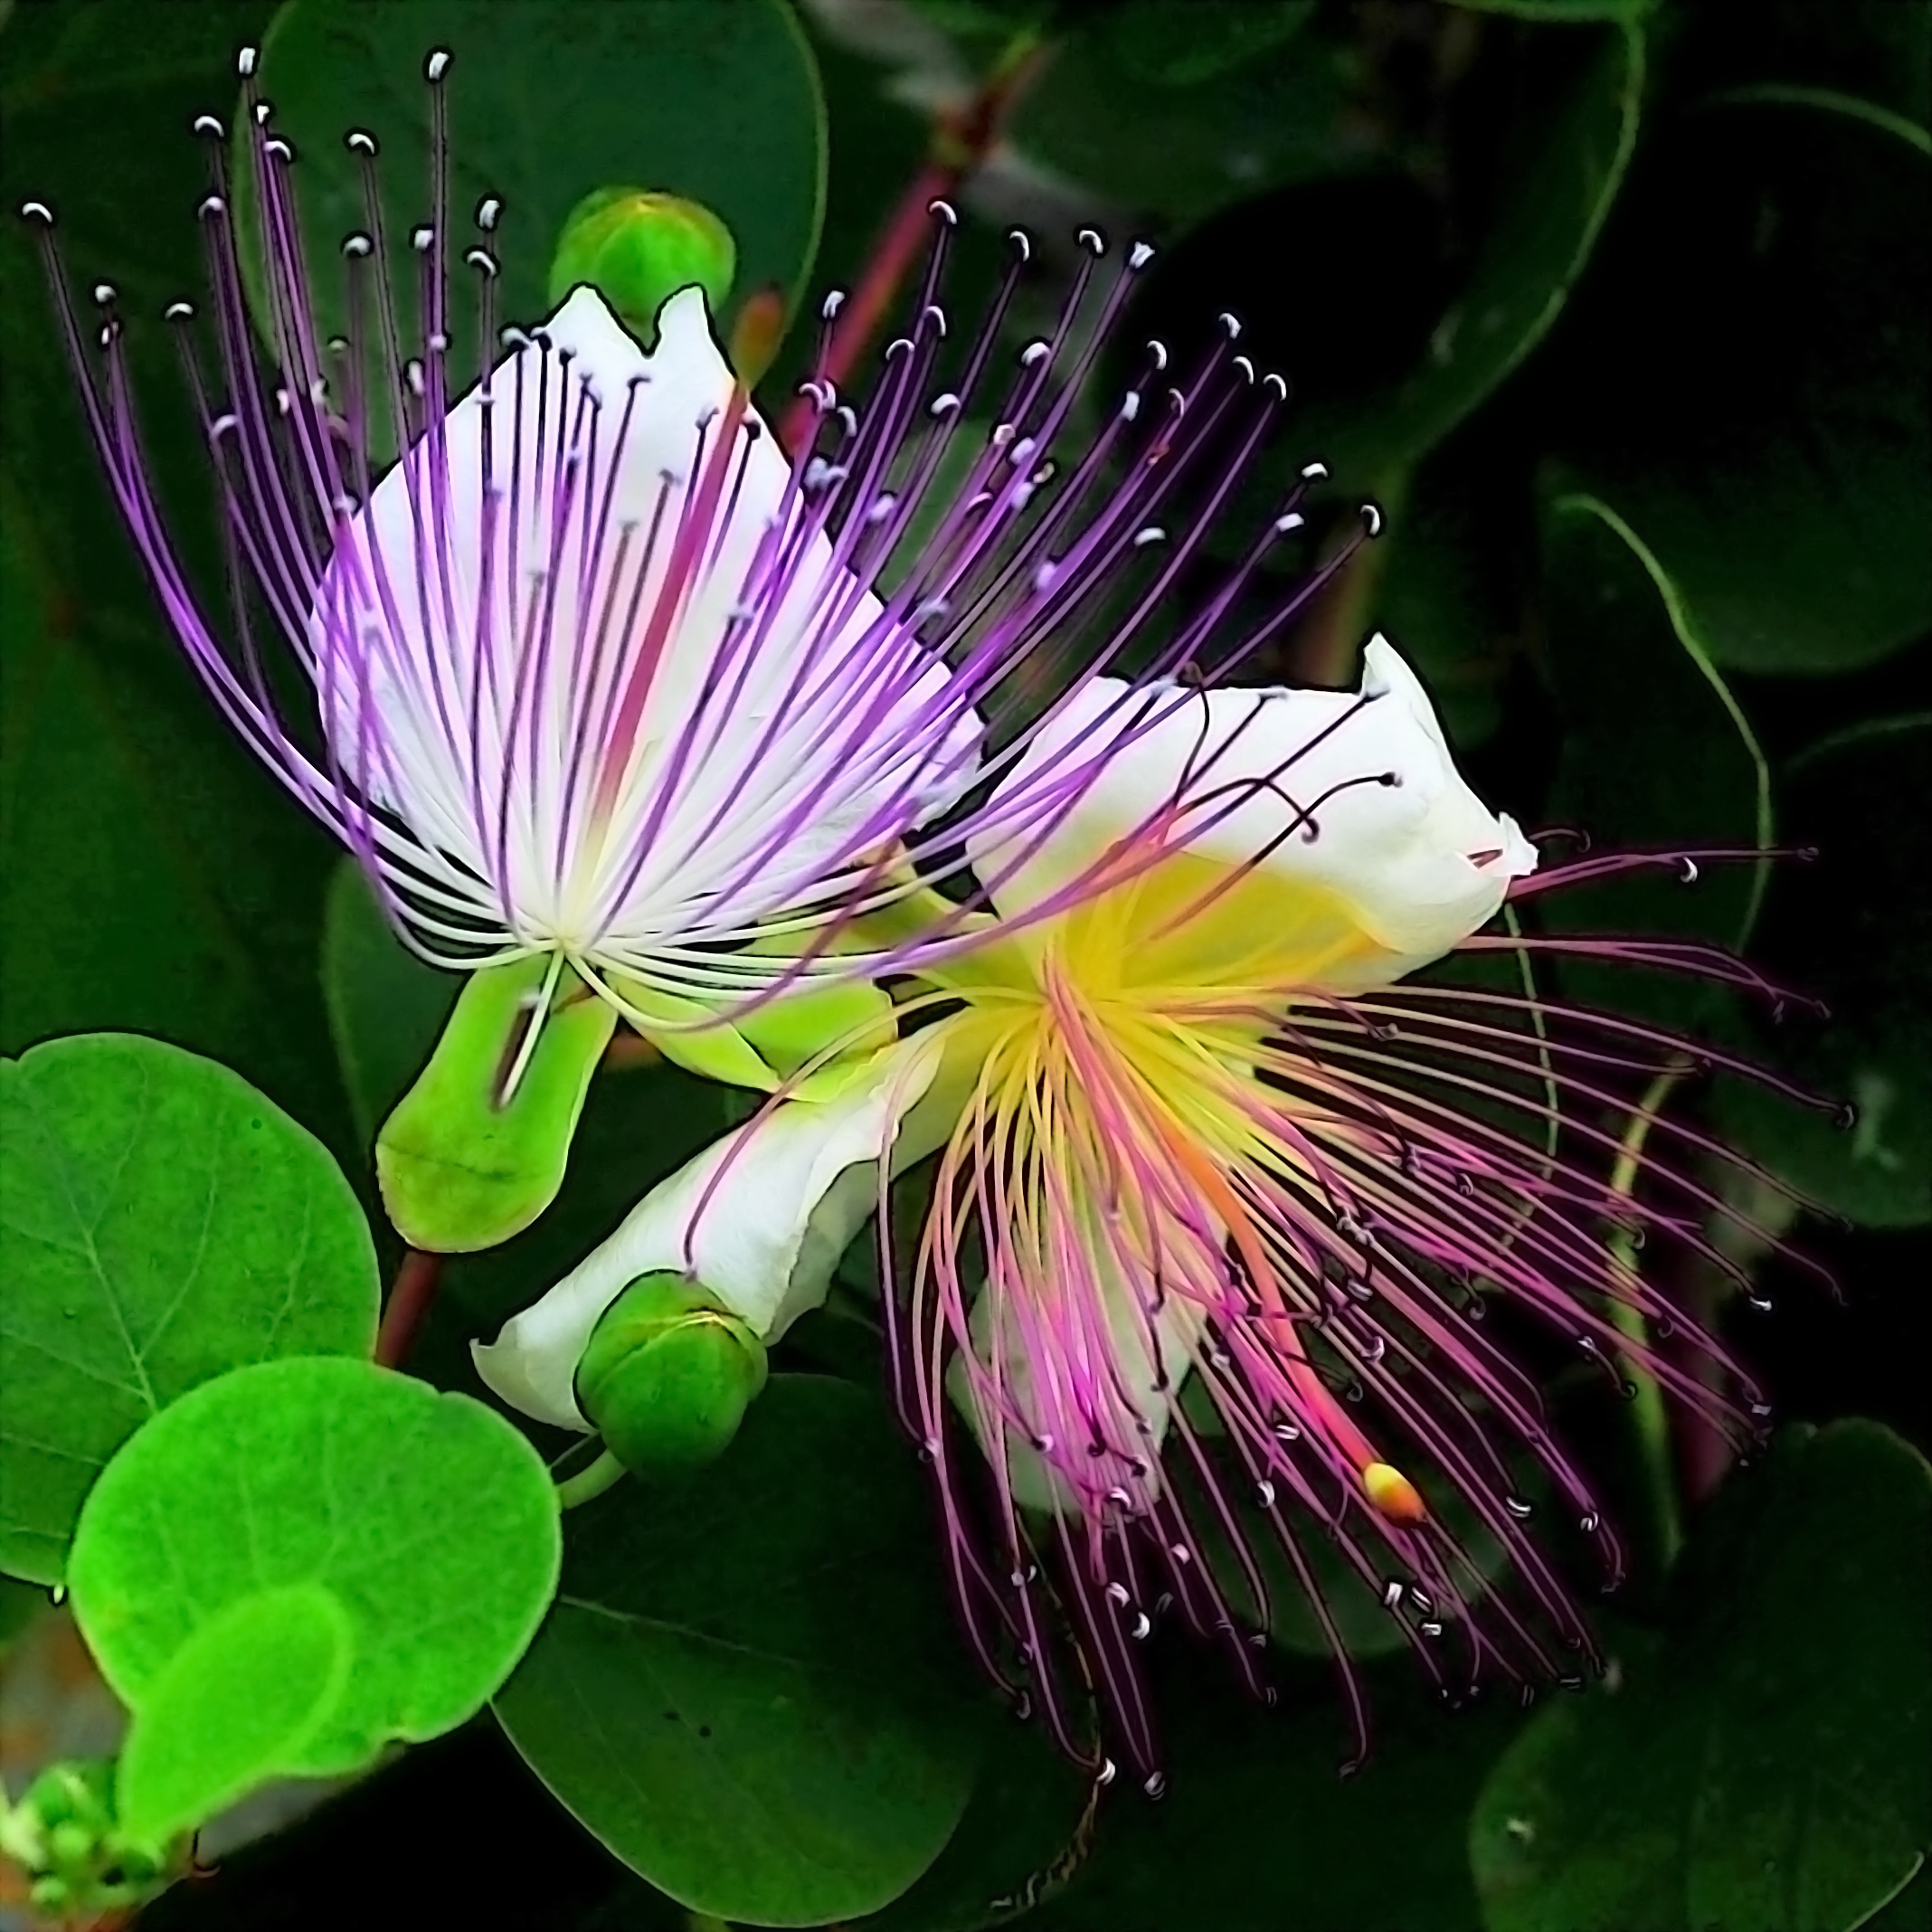 The caper flower....